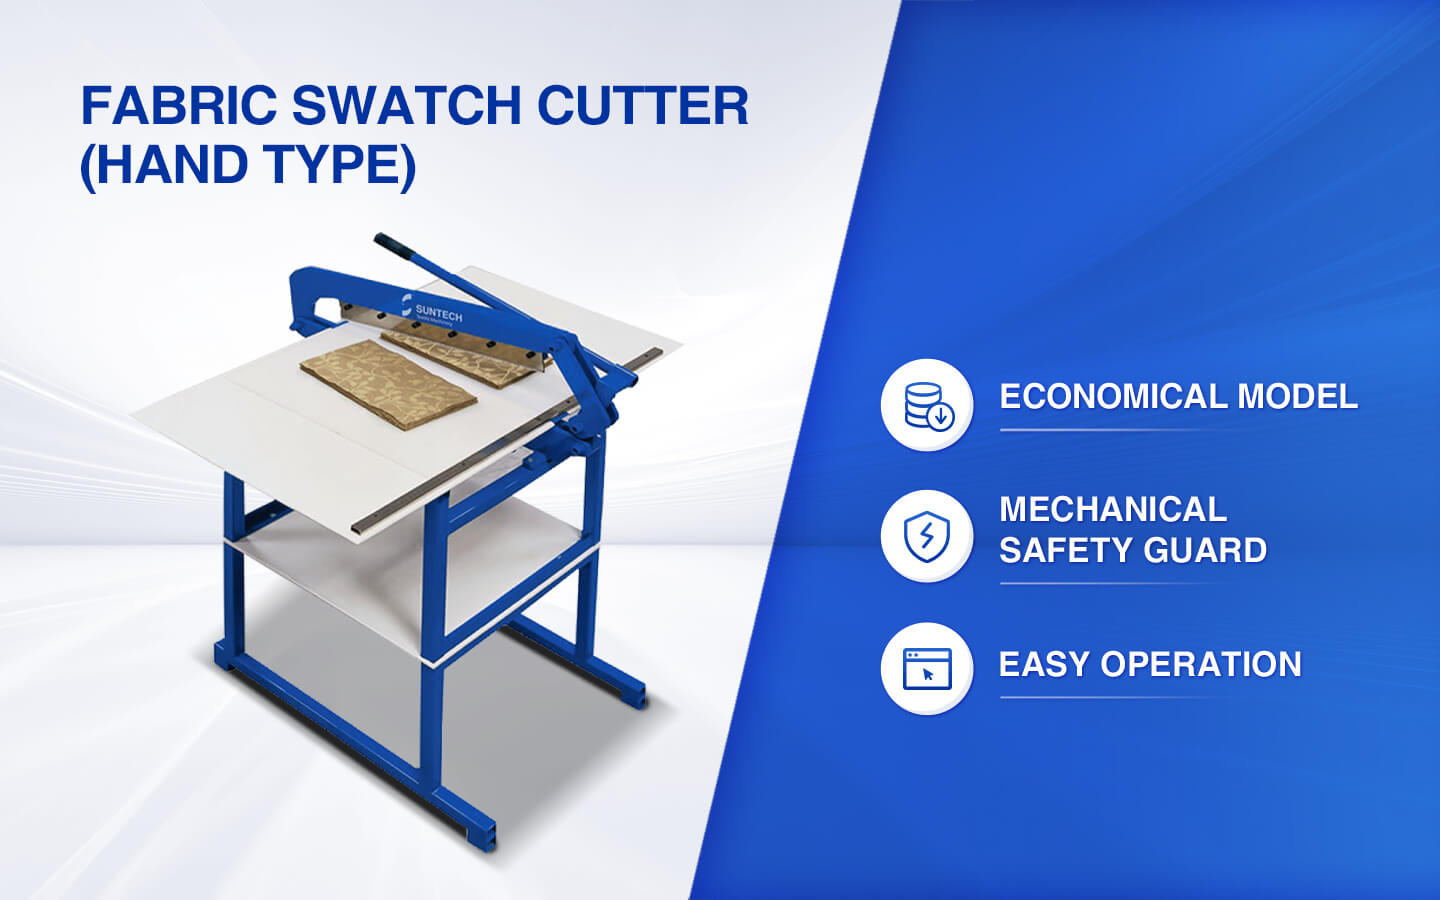 Fabric Swatch Cutter features